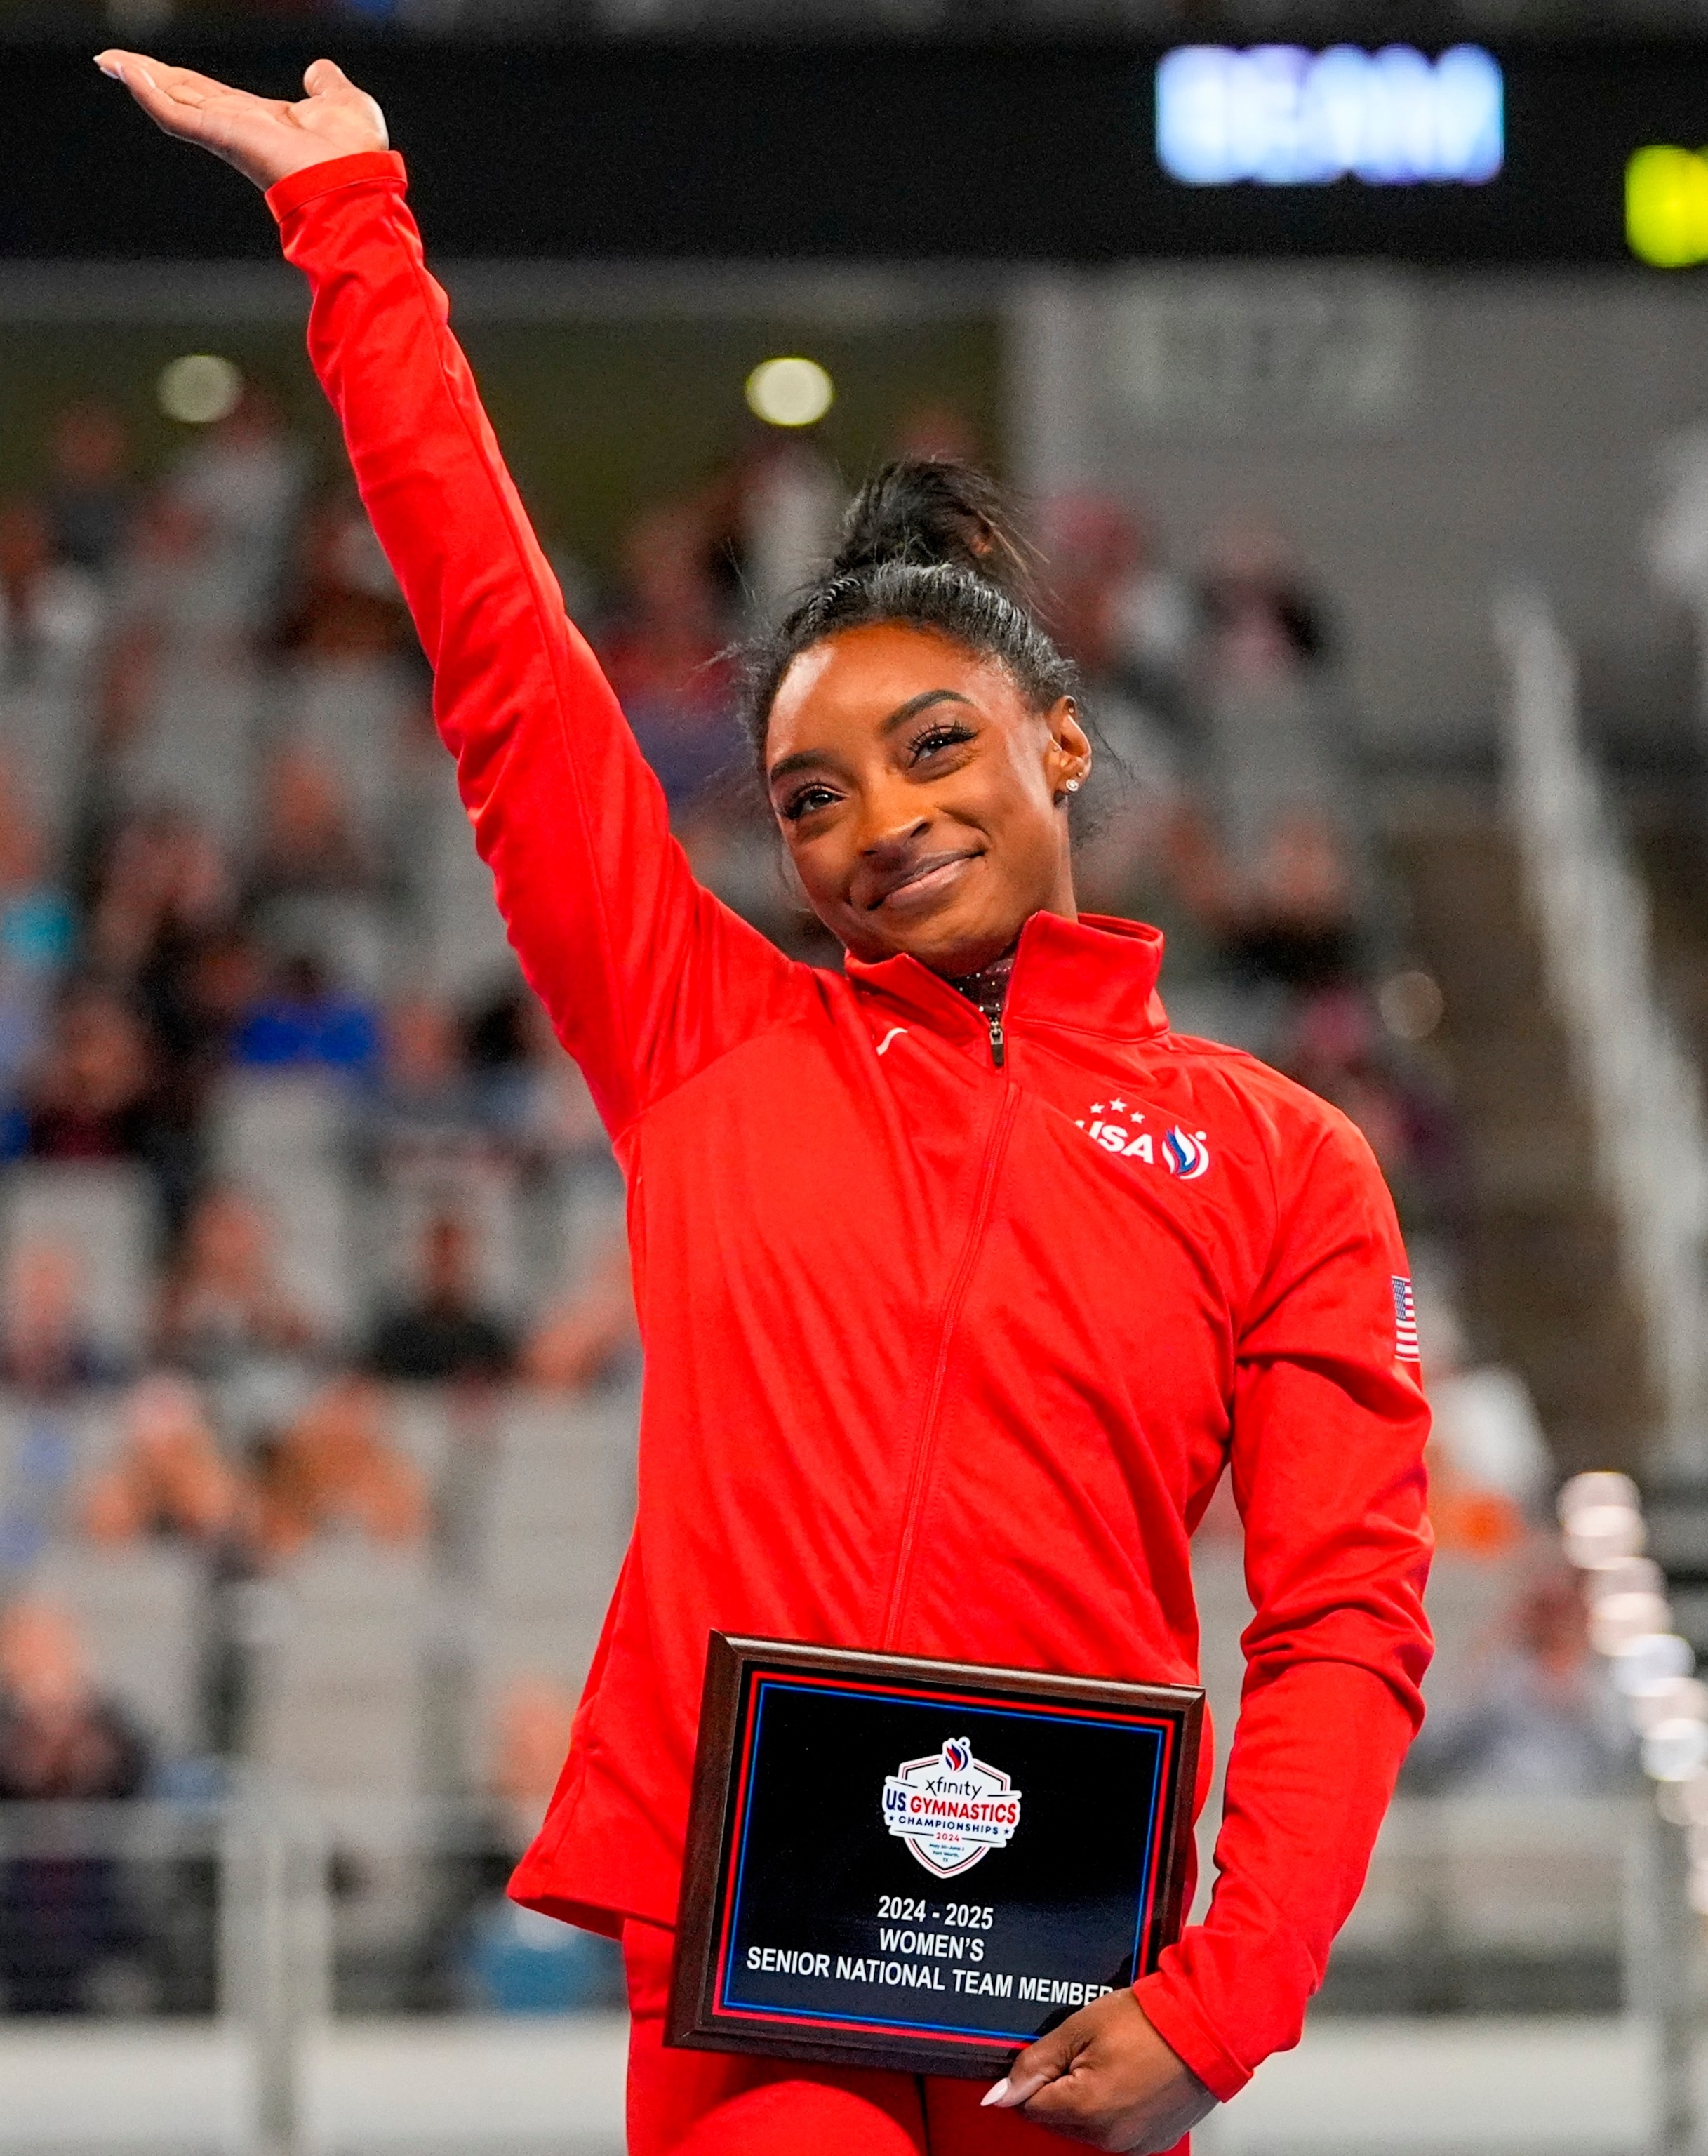 PHOTO: Simone Biles reacts after being named to the U.S. women's senior national team during the U.S. Gymnastics Championships, June 2, 2024, in Fort Worth, Texas.